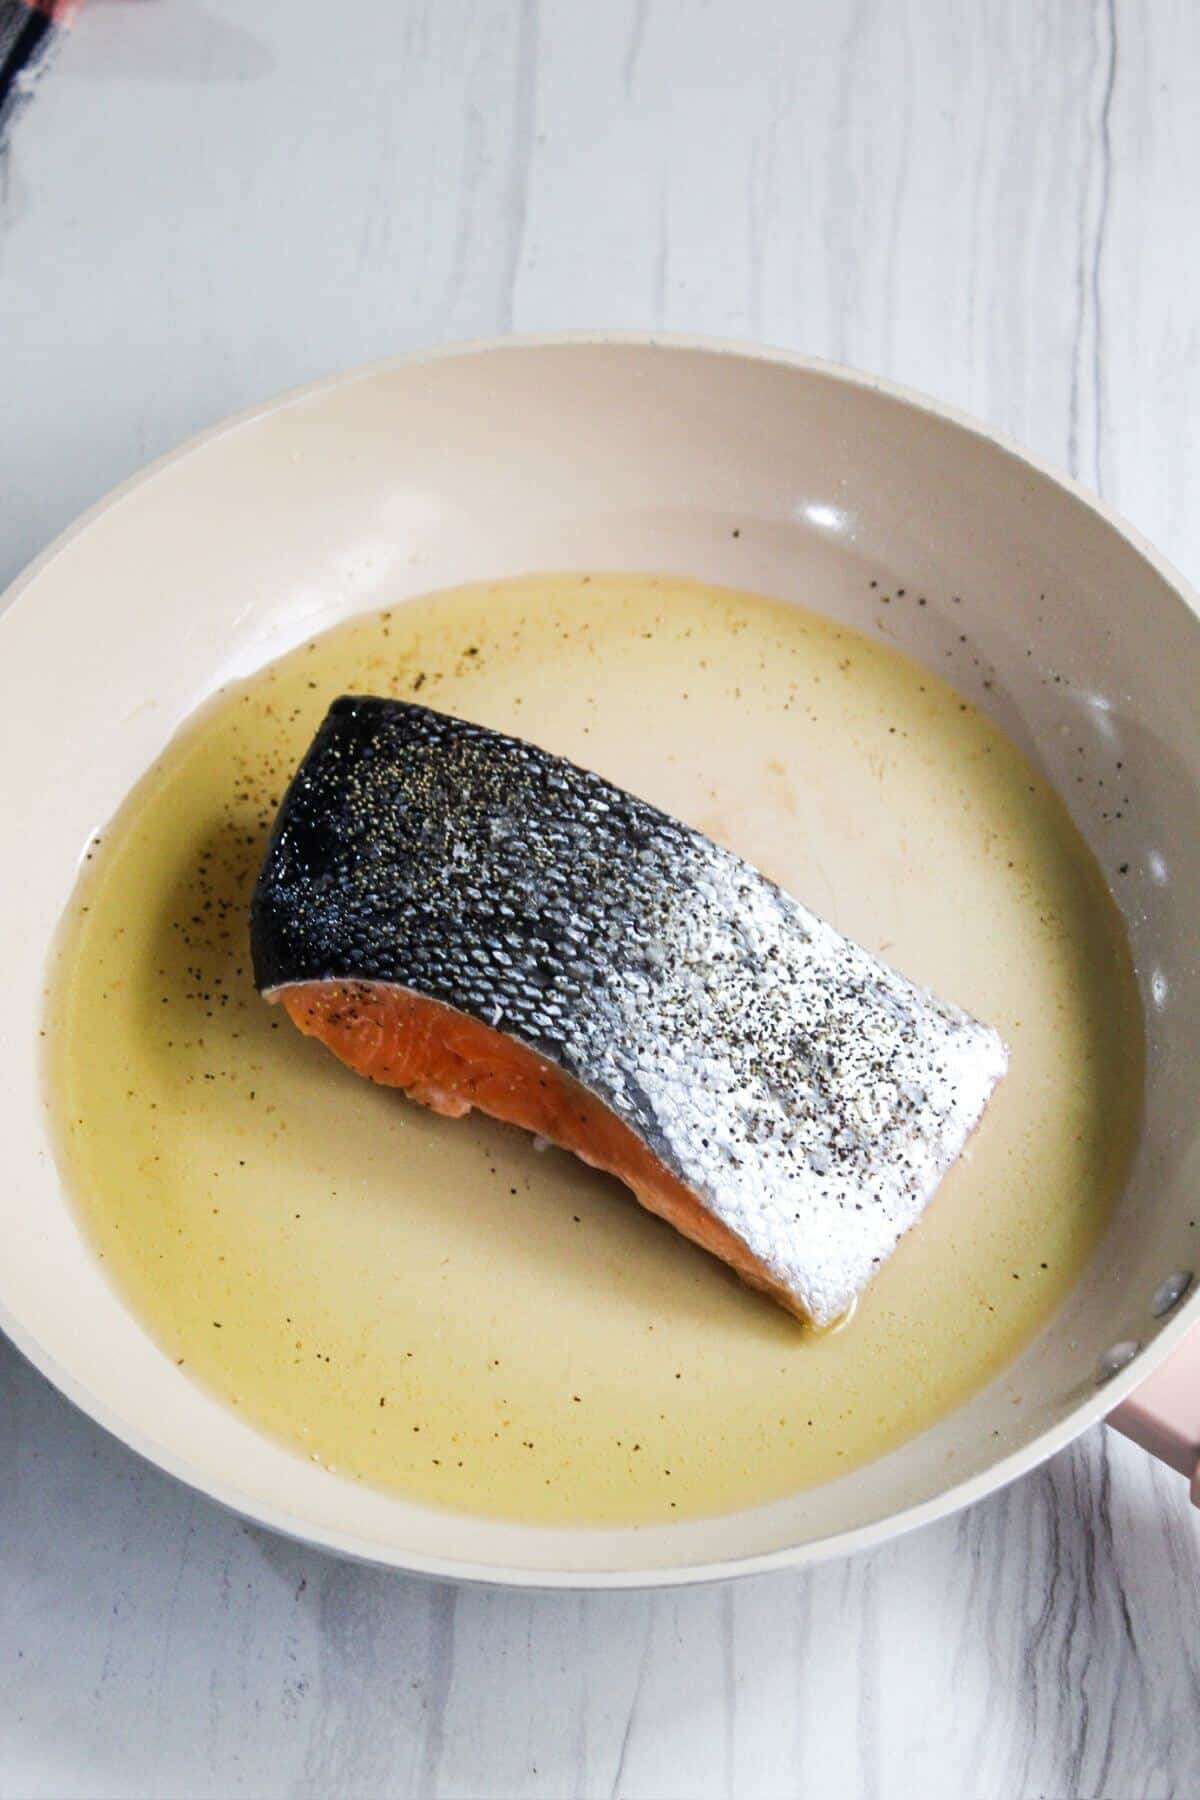 A salmon fillet in a frying pan with oil.